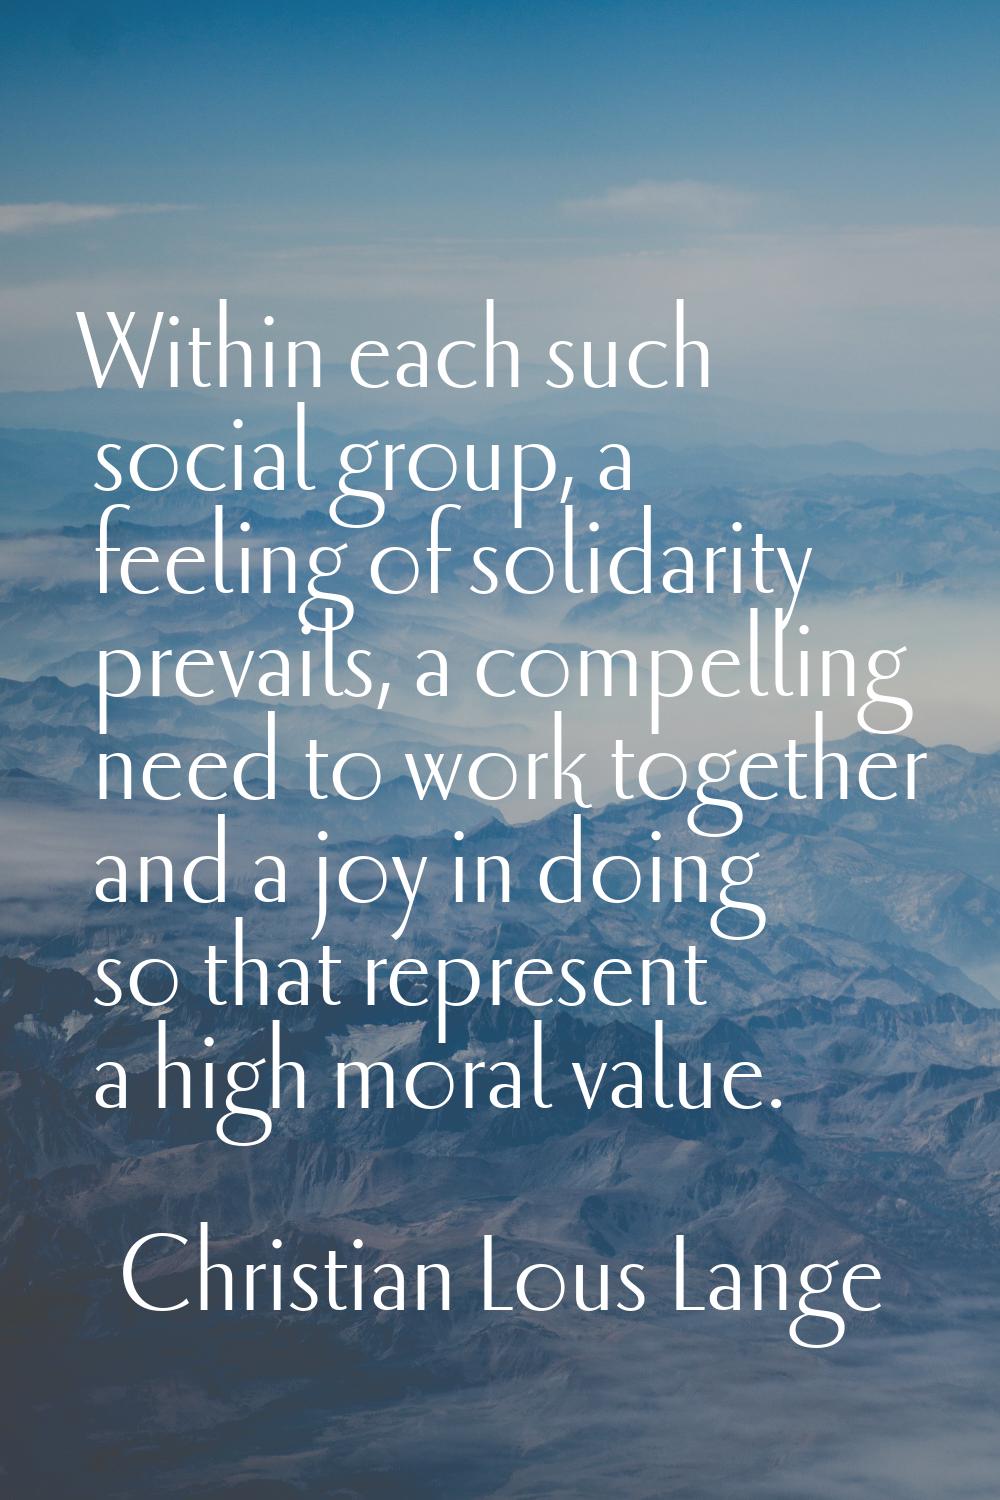 Within each such social group, a feeling of solidarity prevails, a compelling need to work together